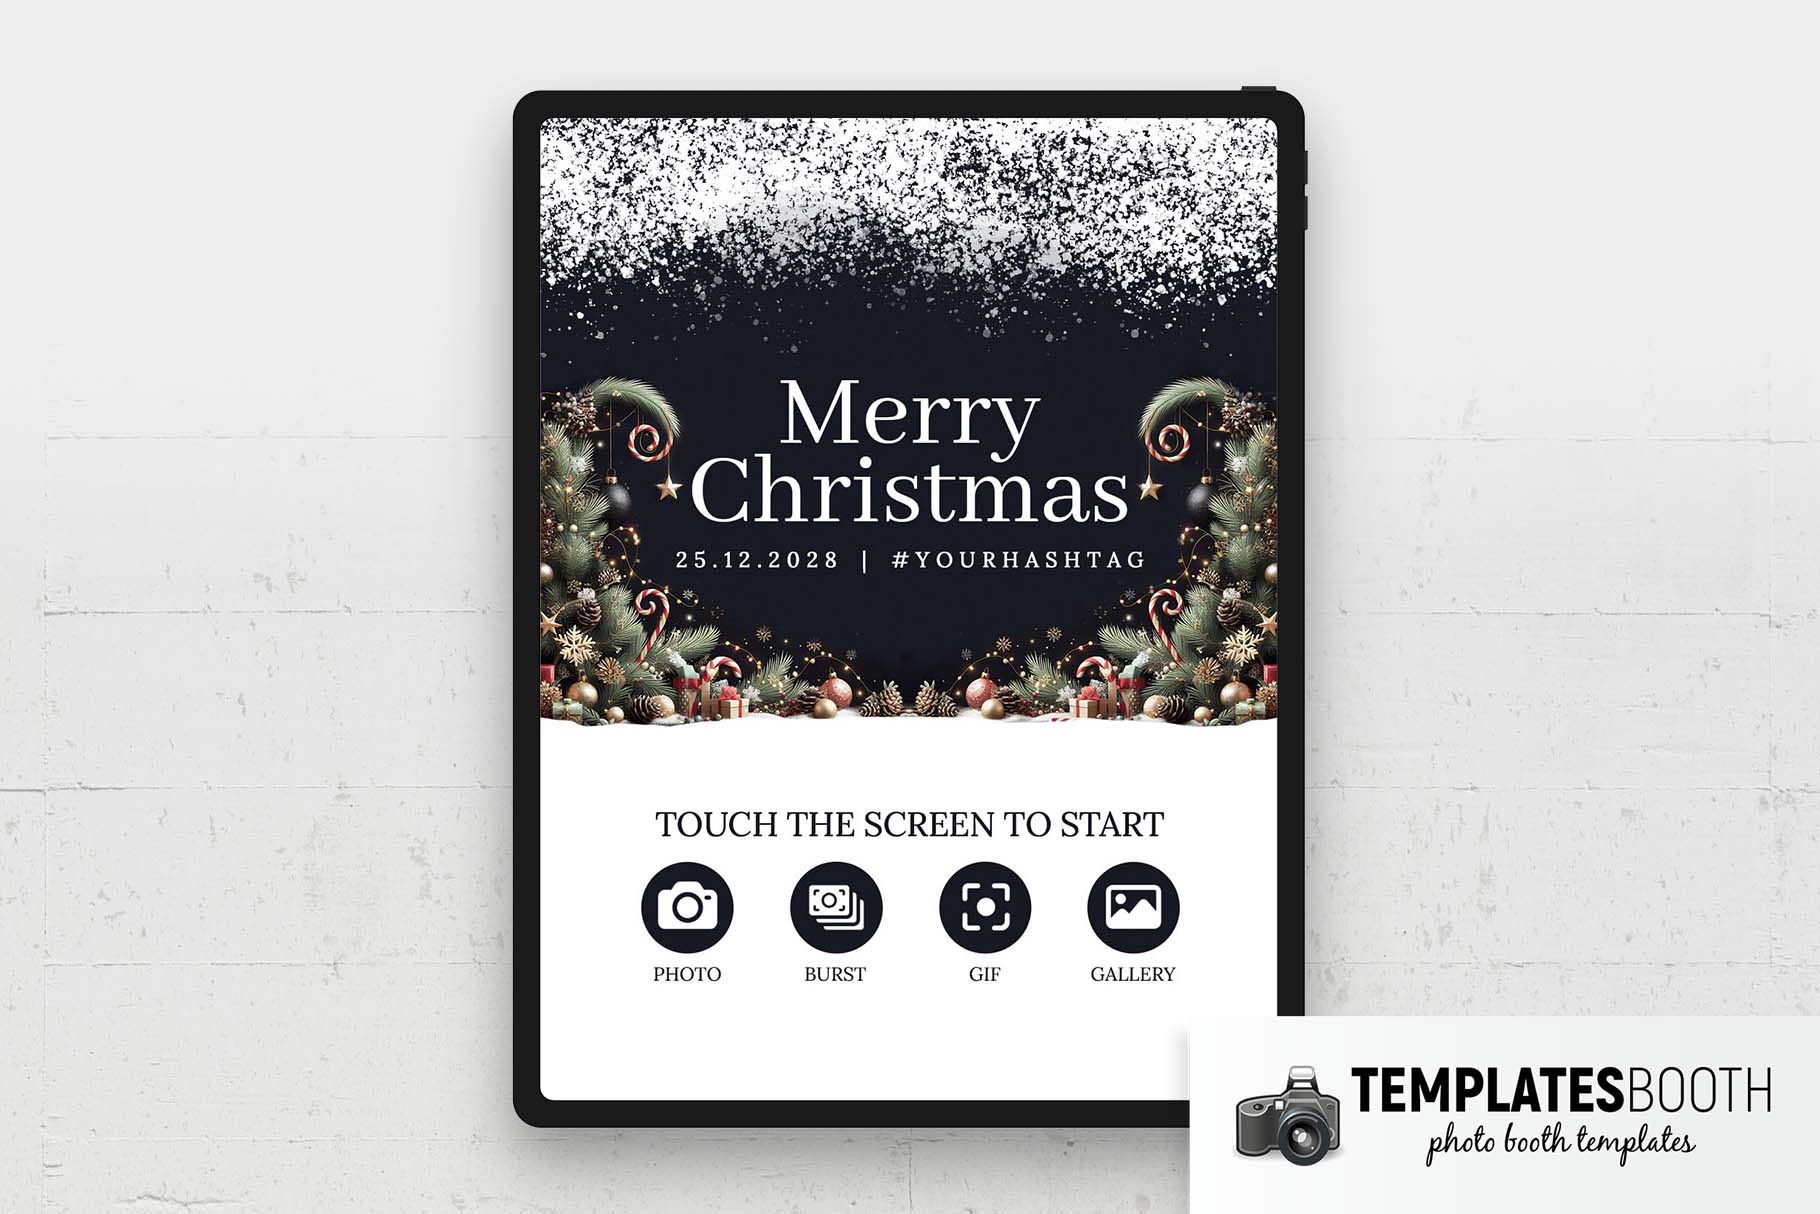 Merry Christmas Photo Booth Welcome Screen